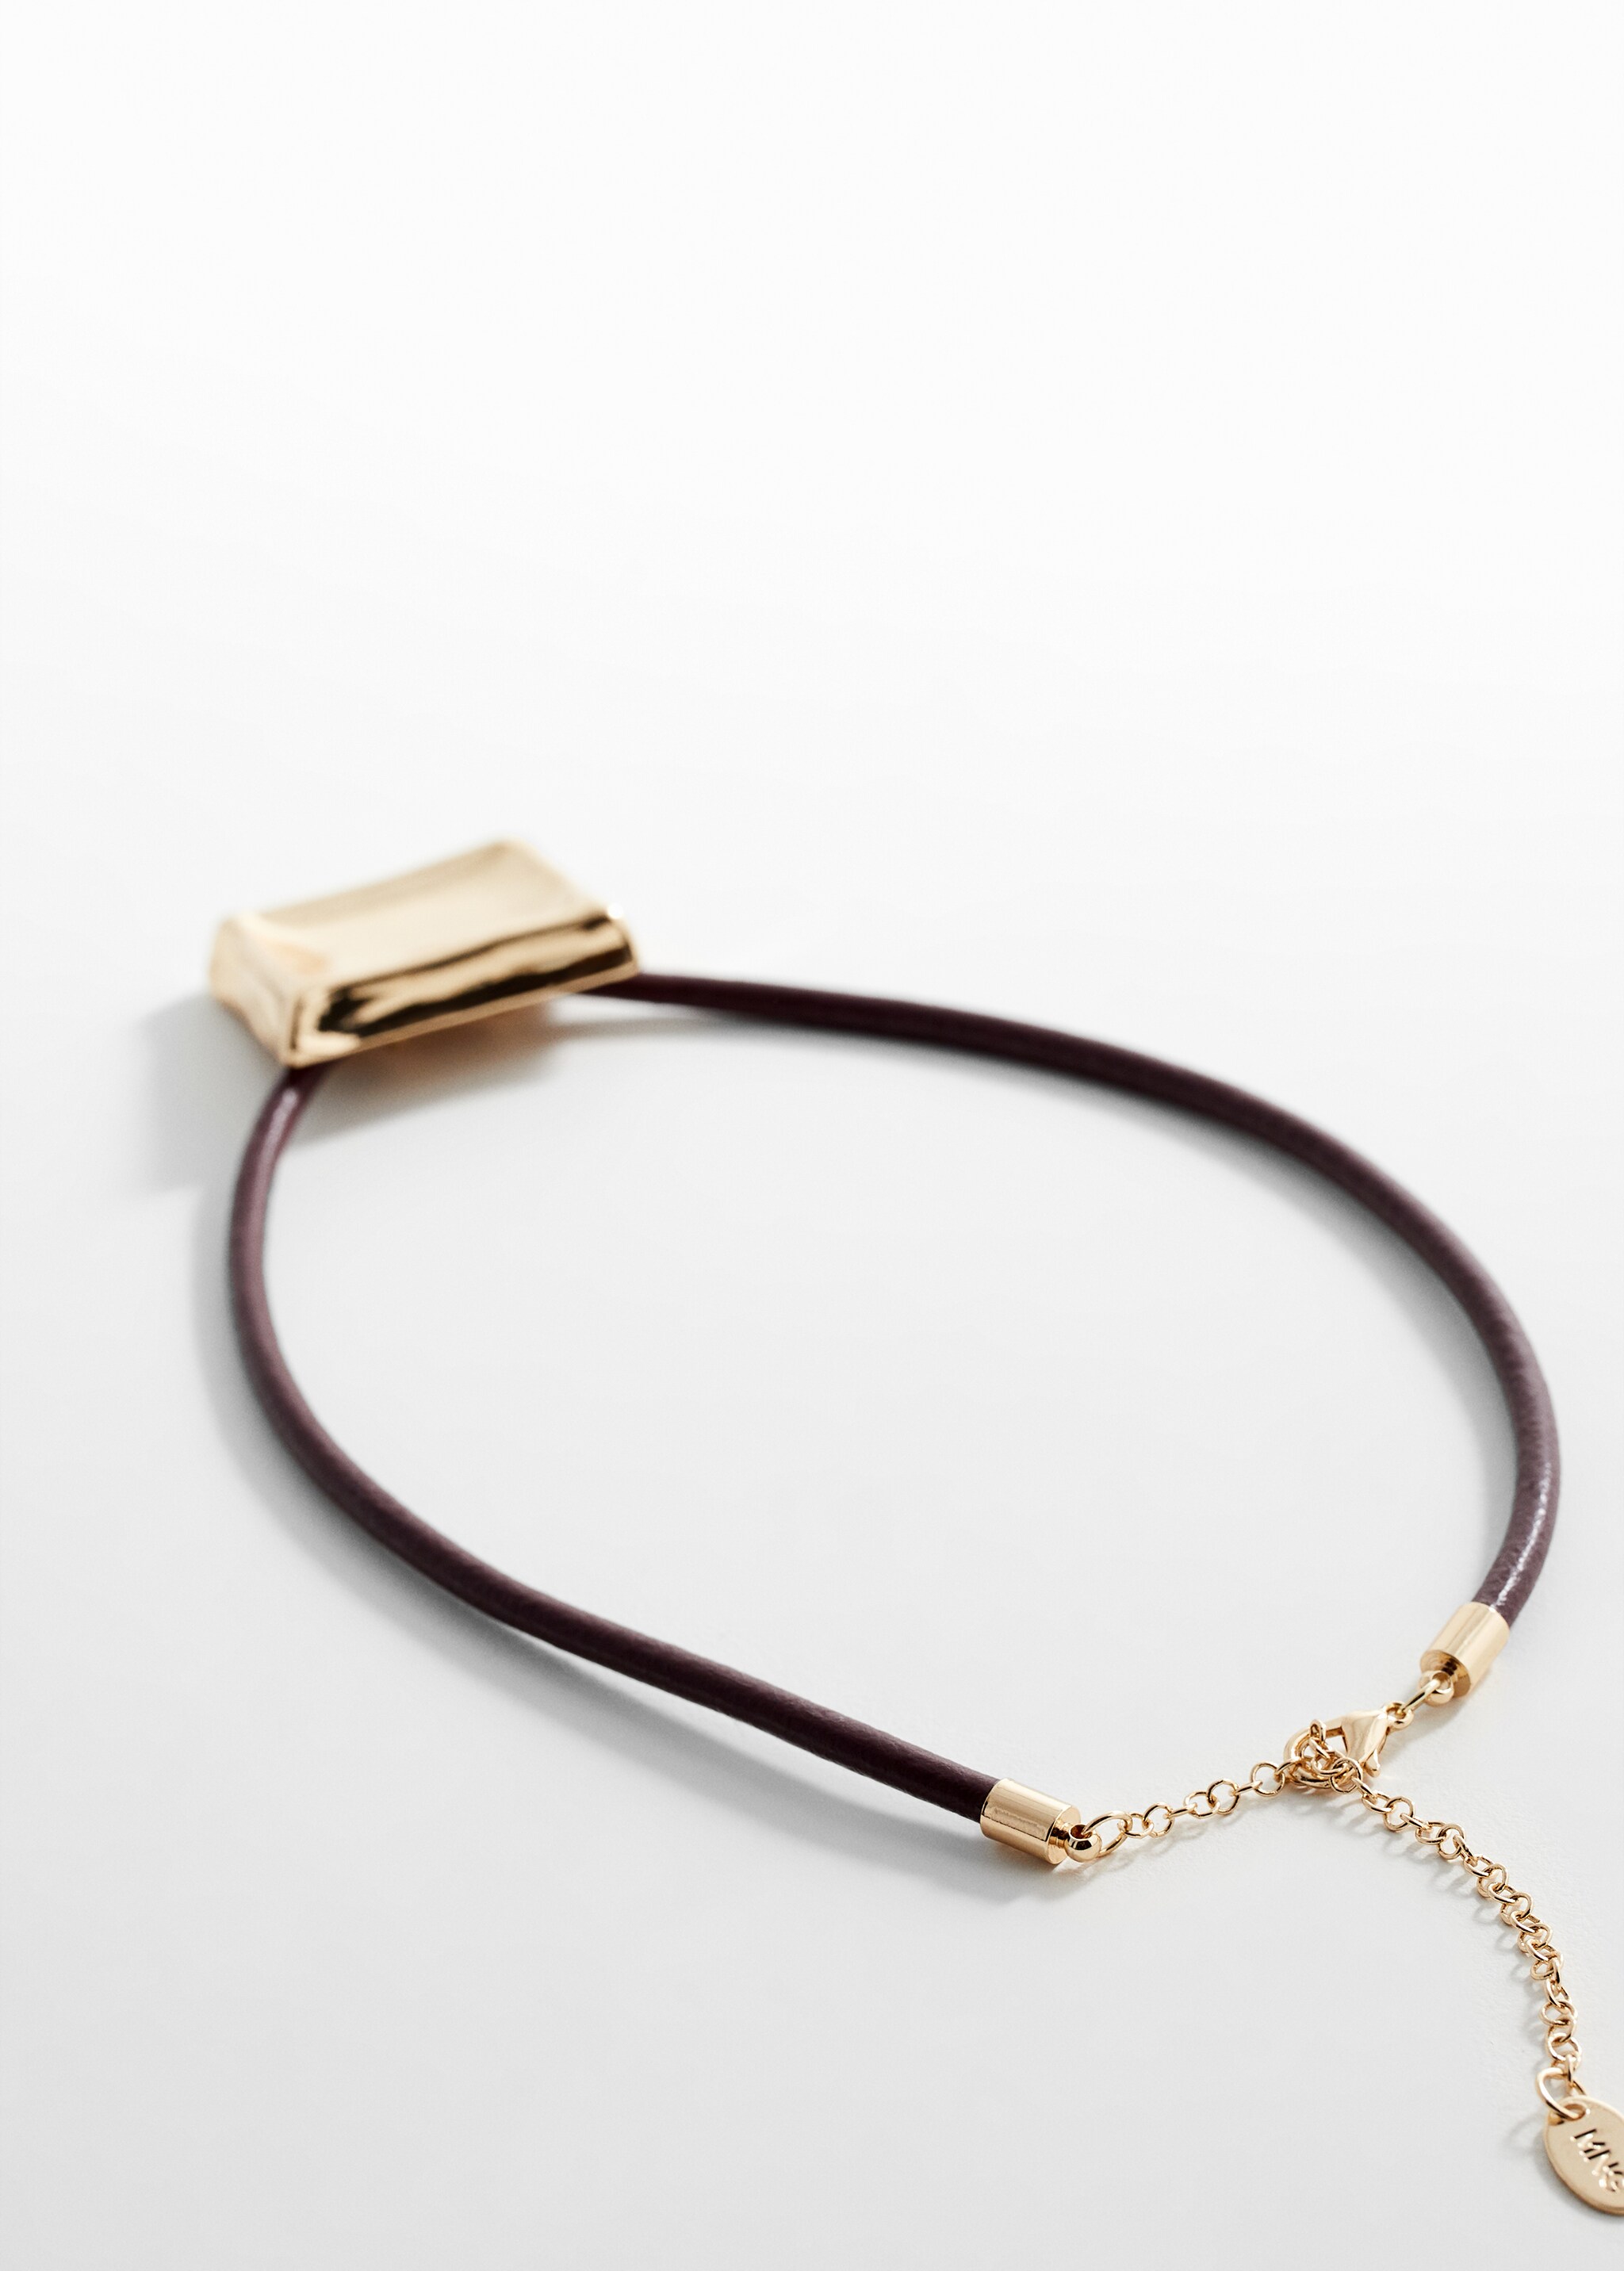 Leather cord necklace - Details of the article 1